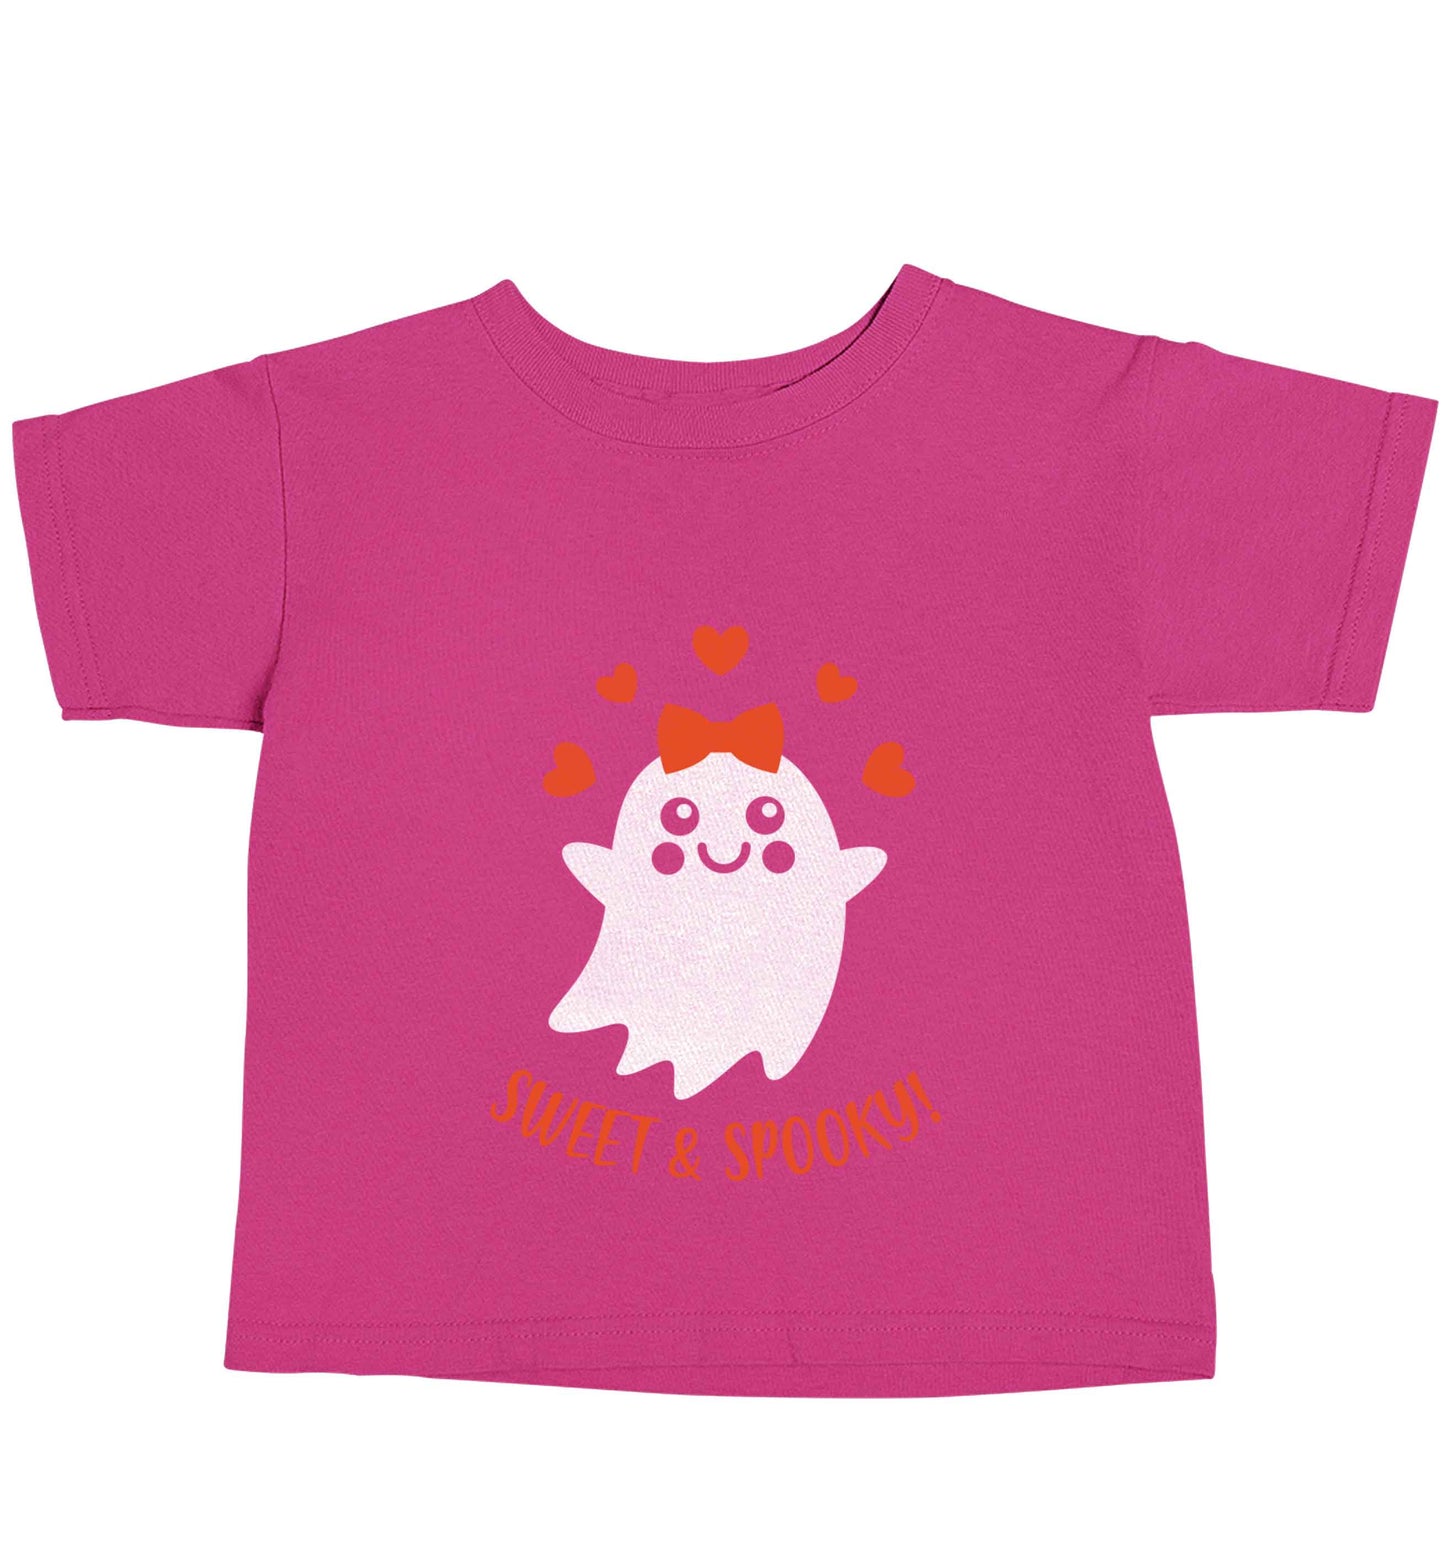 Sweet and spooky pink baby toddler Tshirt 2 Years